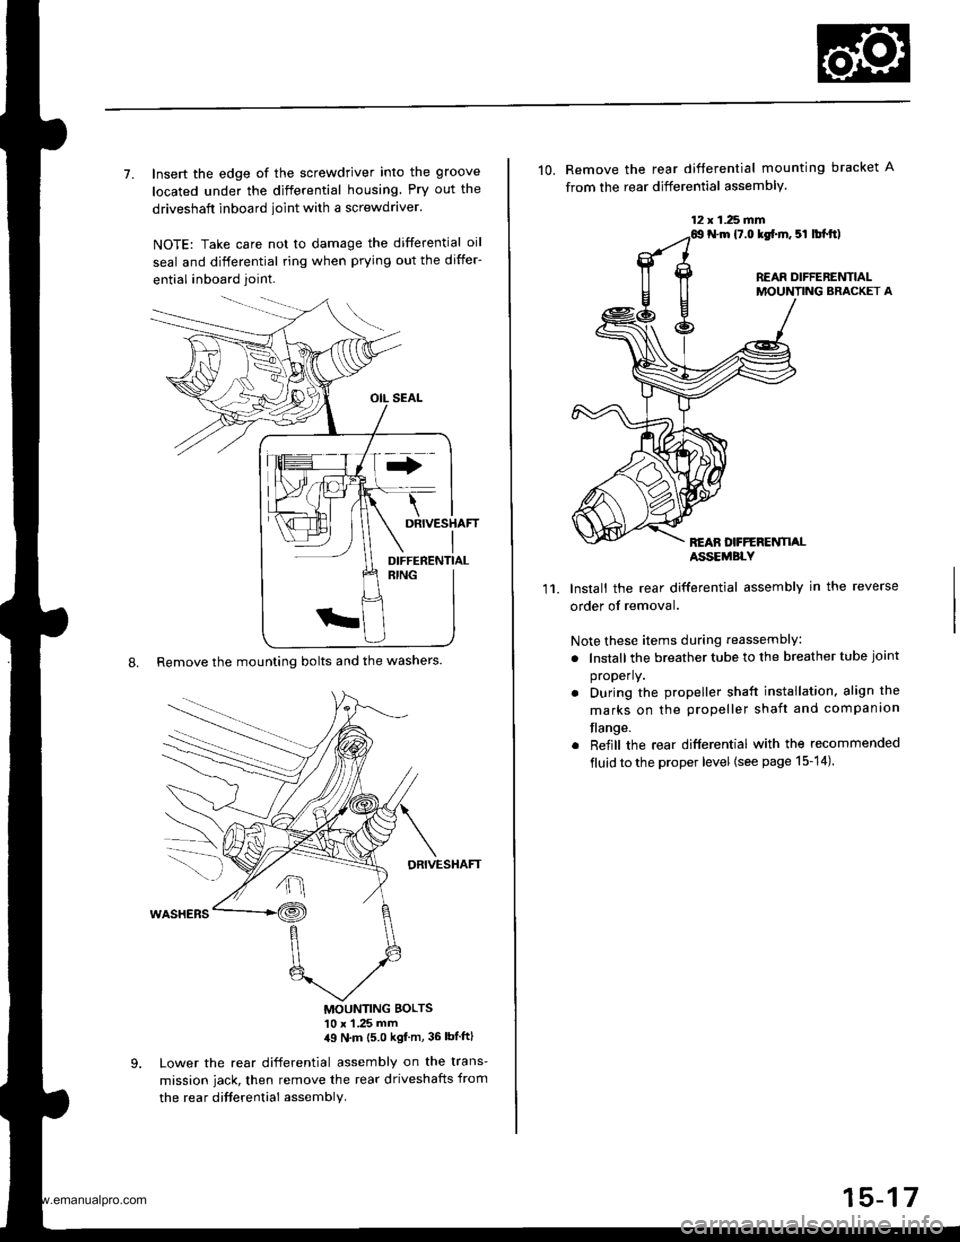 HONDA CR-V 1998 RD1-RD3 / 1.G Service Manual 
7. Insert the edge of the screwdriver into the groove
located under the differential housing Pry out the
driveshaft inboard ioint with a screwdraver.
NOTE: Take care not to damage the differential oi